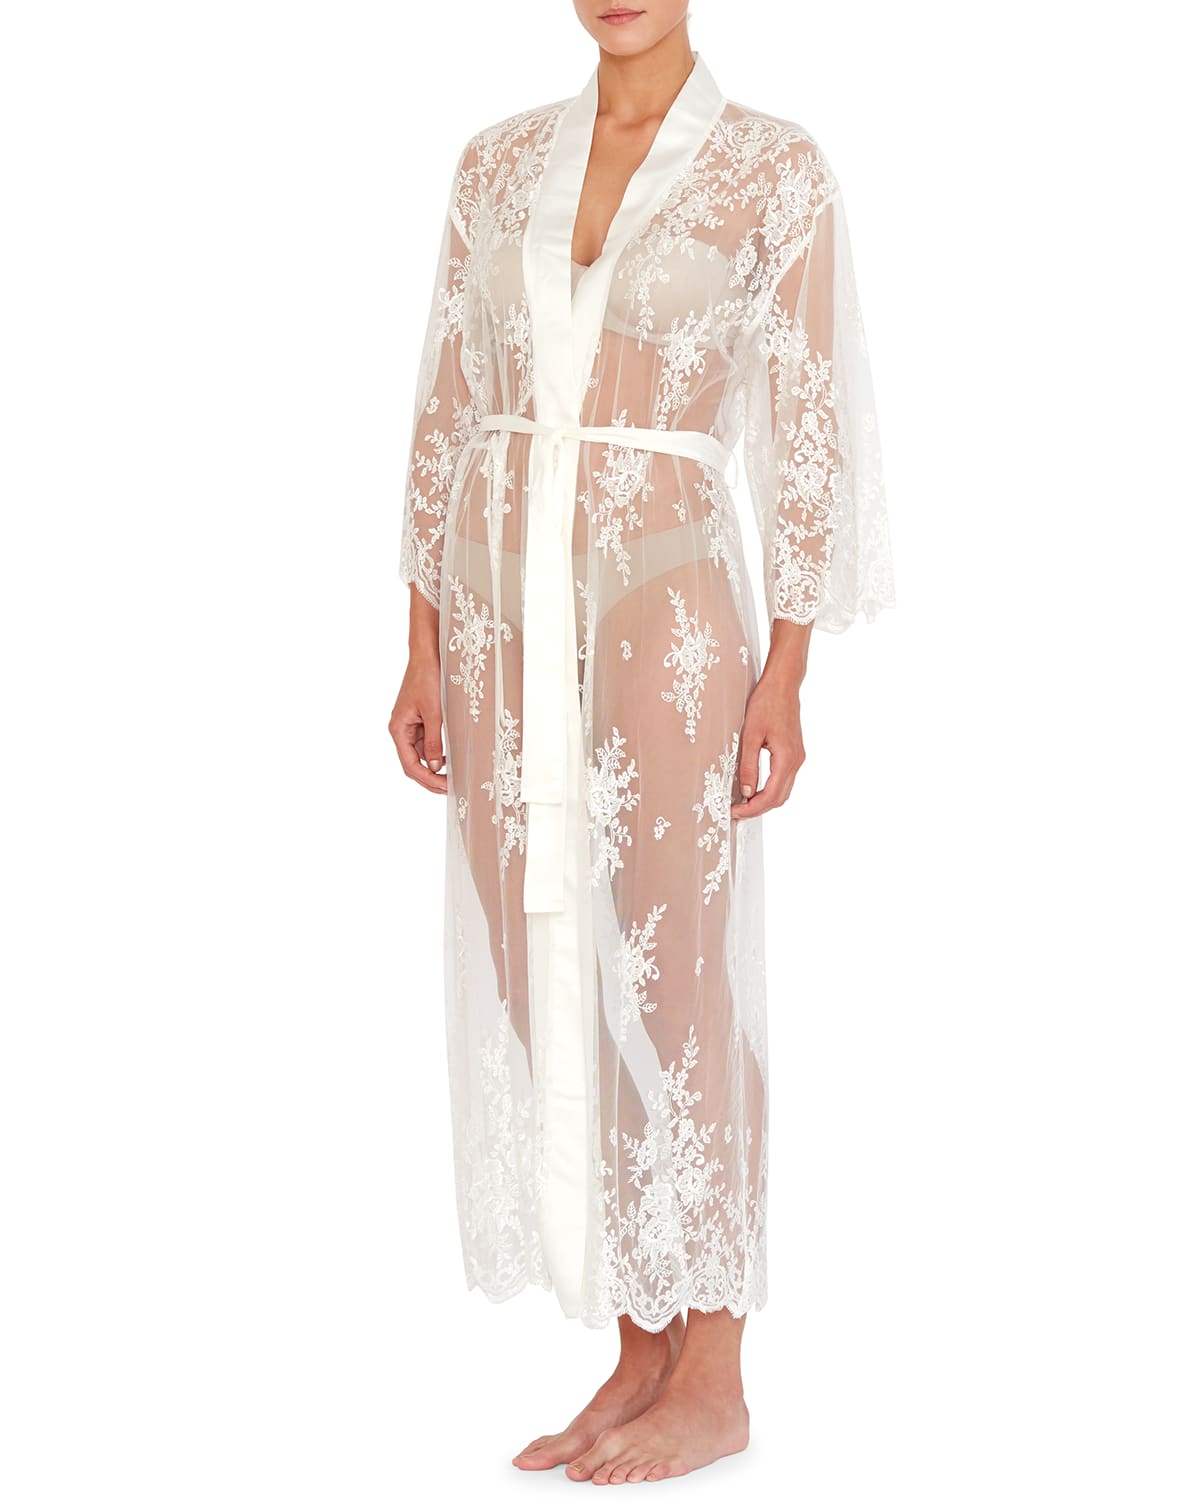 RYA COLLECTION DARLING LACE ROBE,PROD223550028